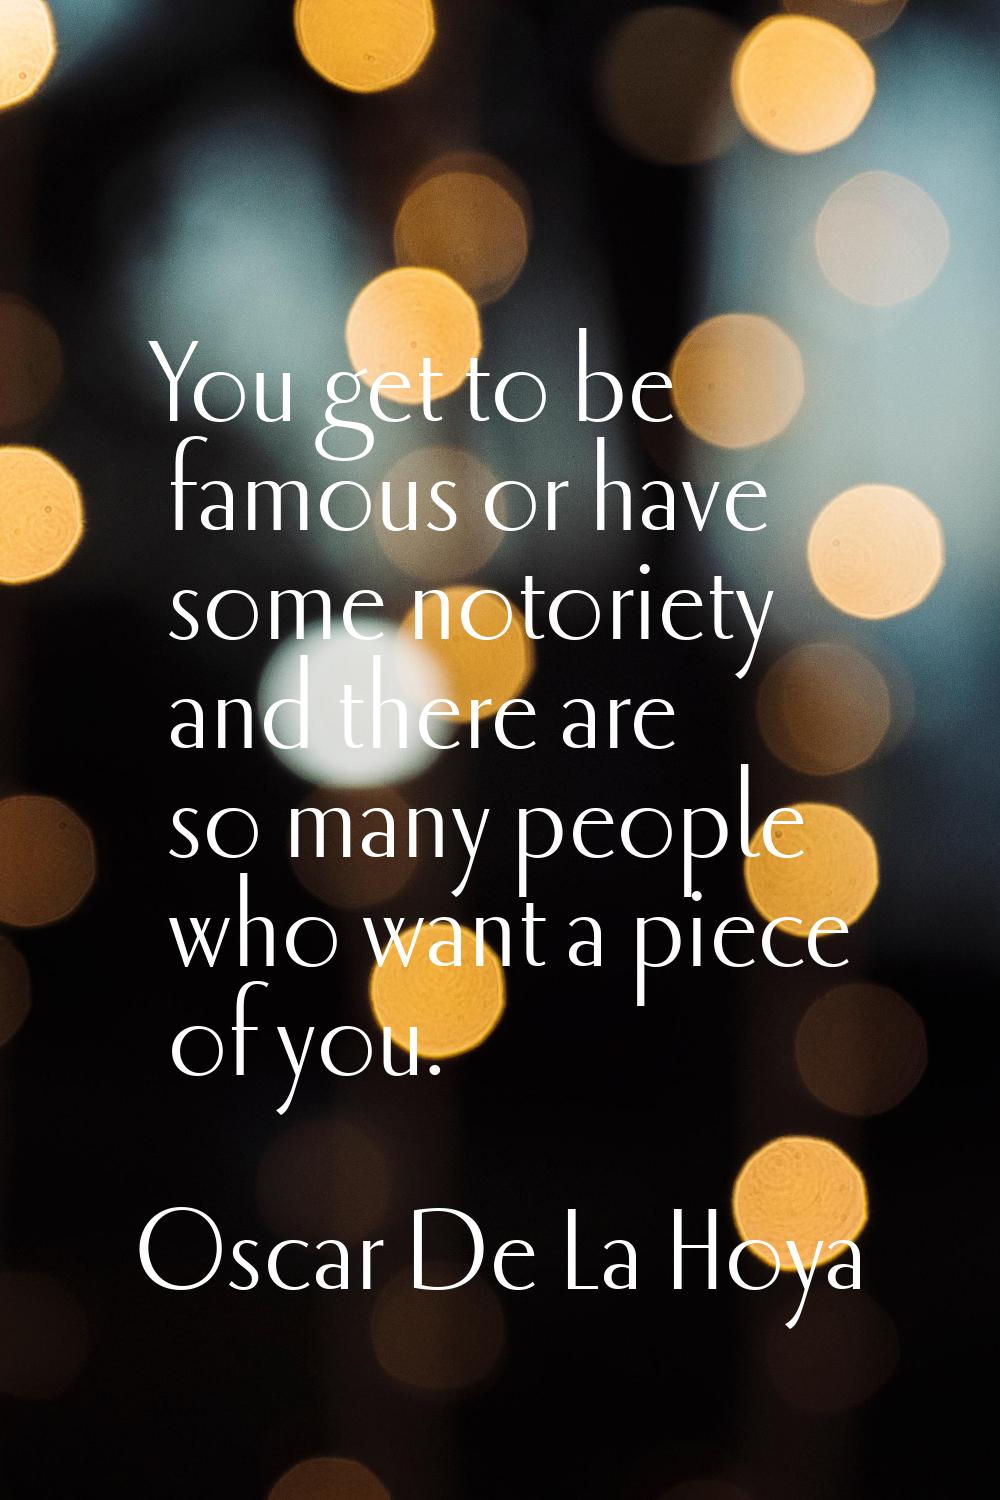 You get to be famous or have some notoriety and there are so many people who want a piece of you.